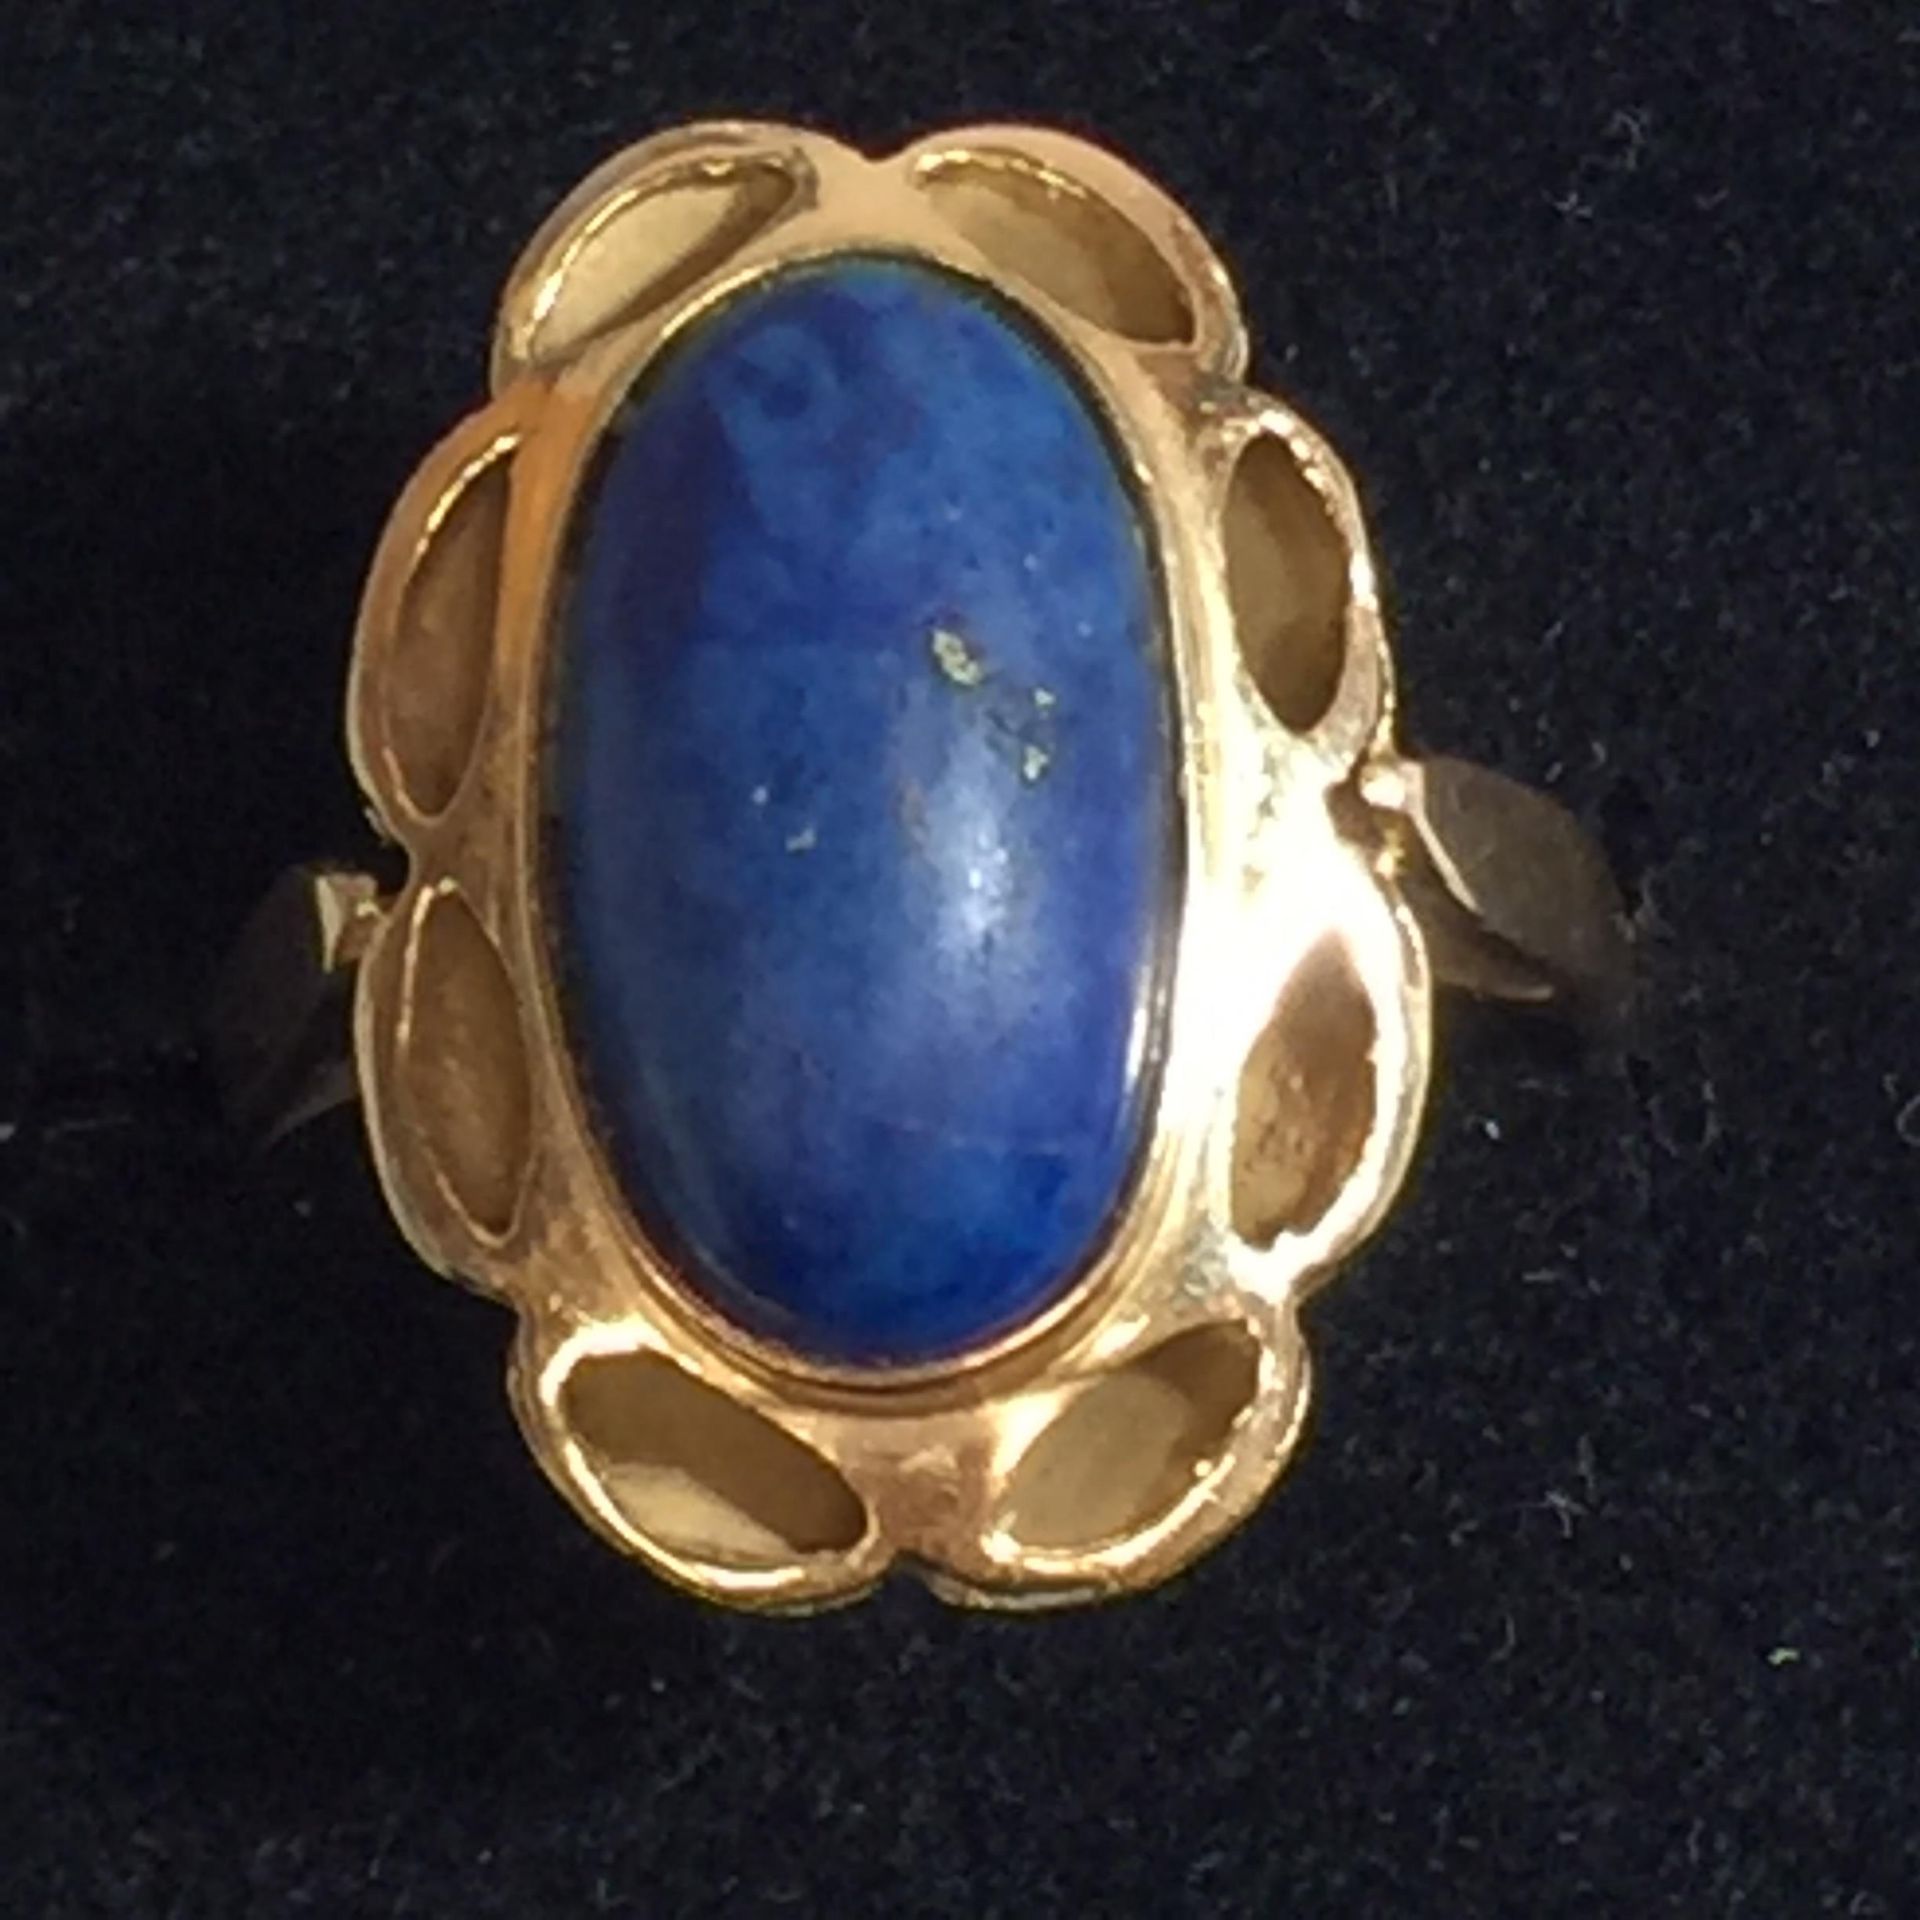 A 15CT GOLD LAPIS LAZULI RING, WEIGHT 5G, SIZE L AND A HALF